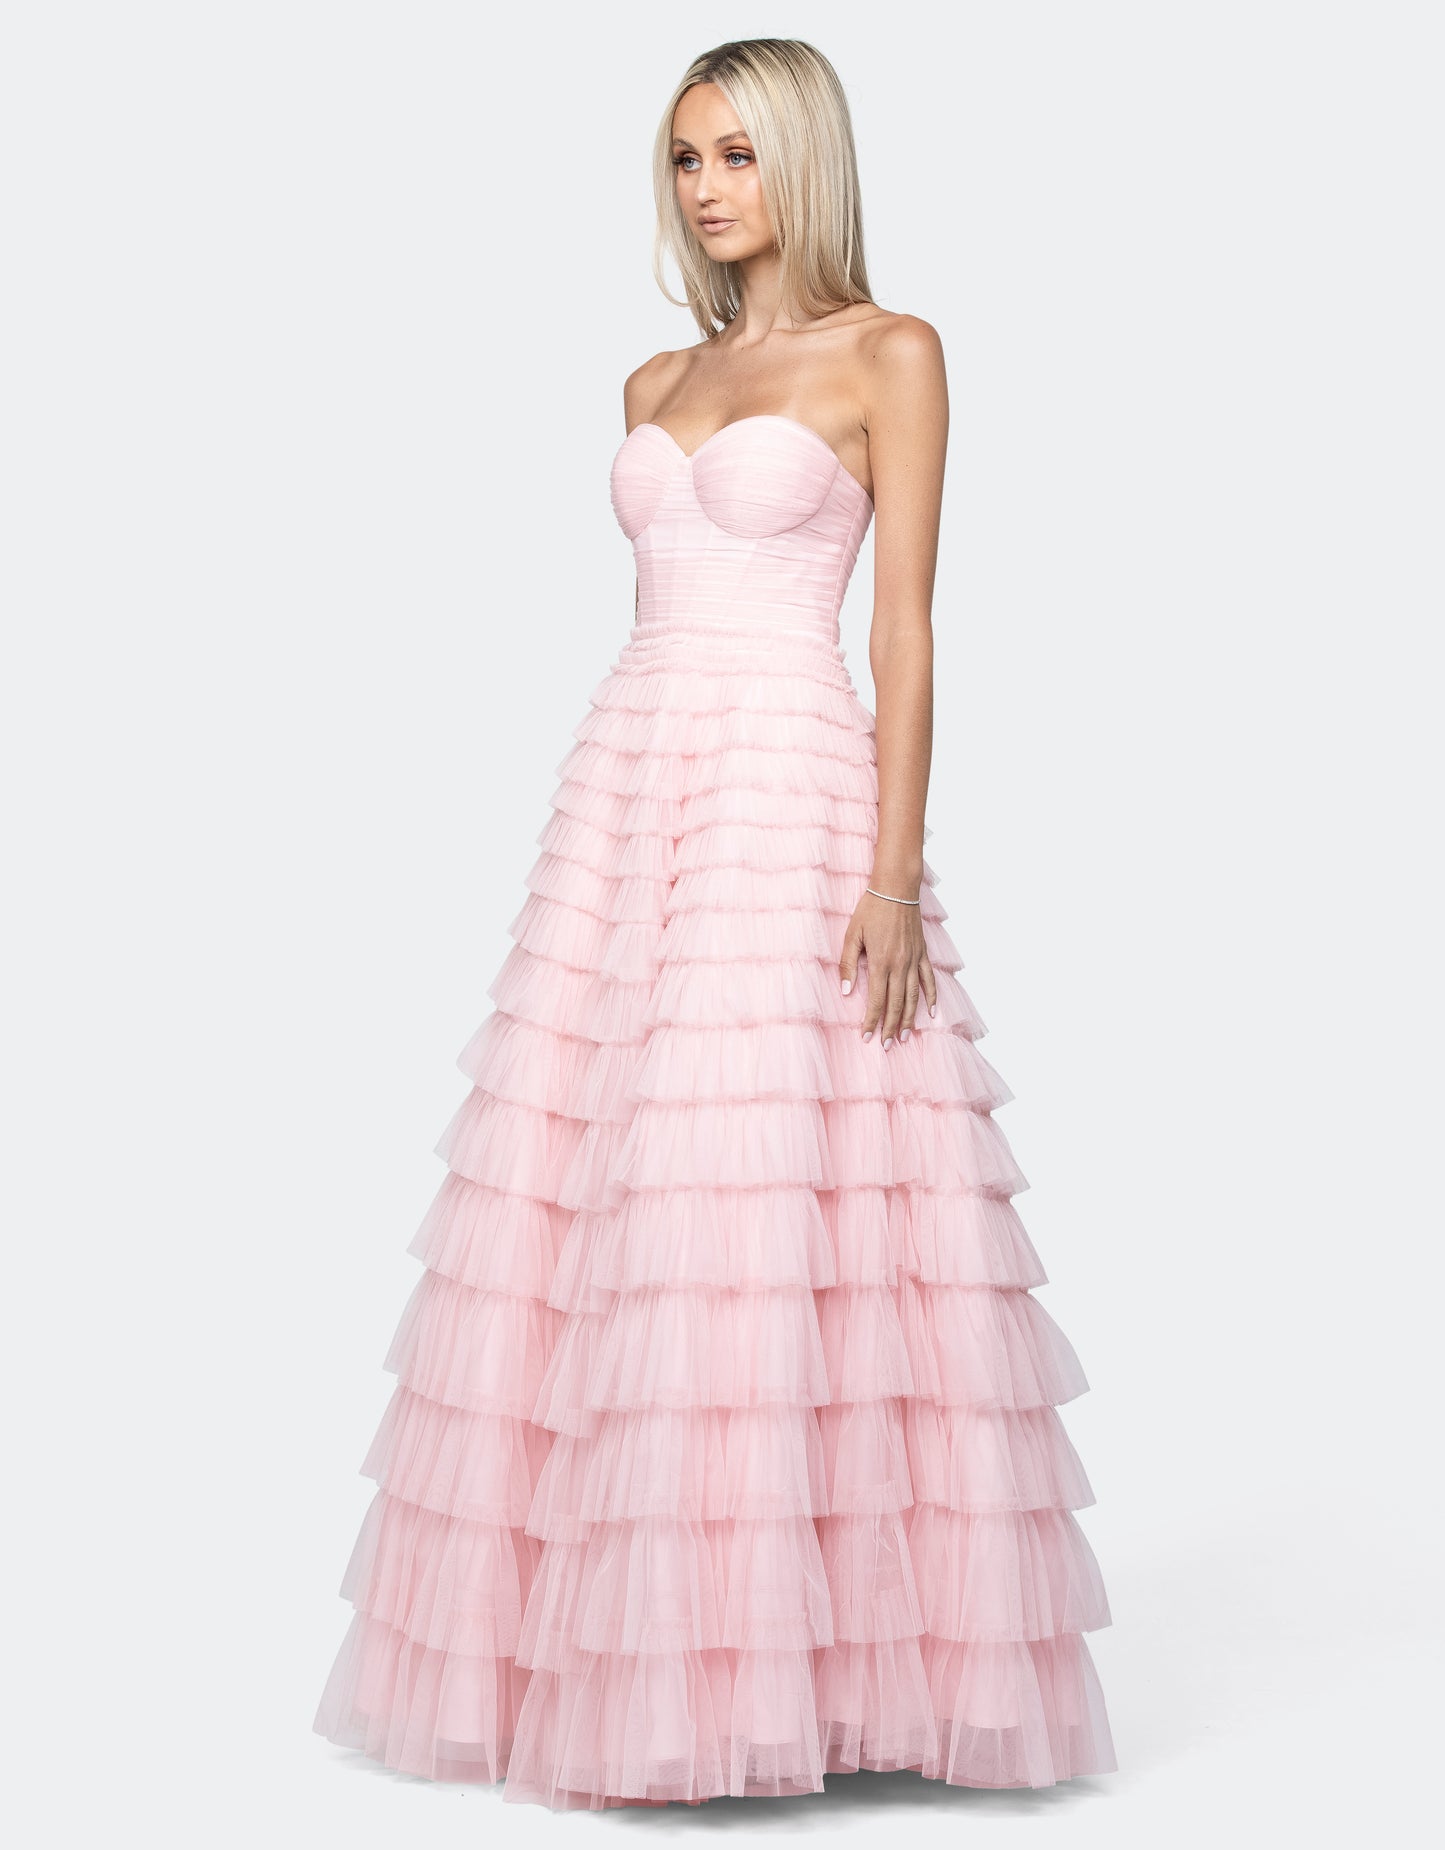 Serenity Sweetheart Strapless Ball Gown